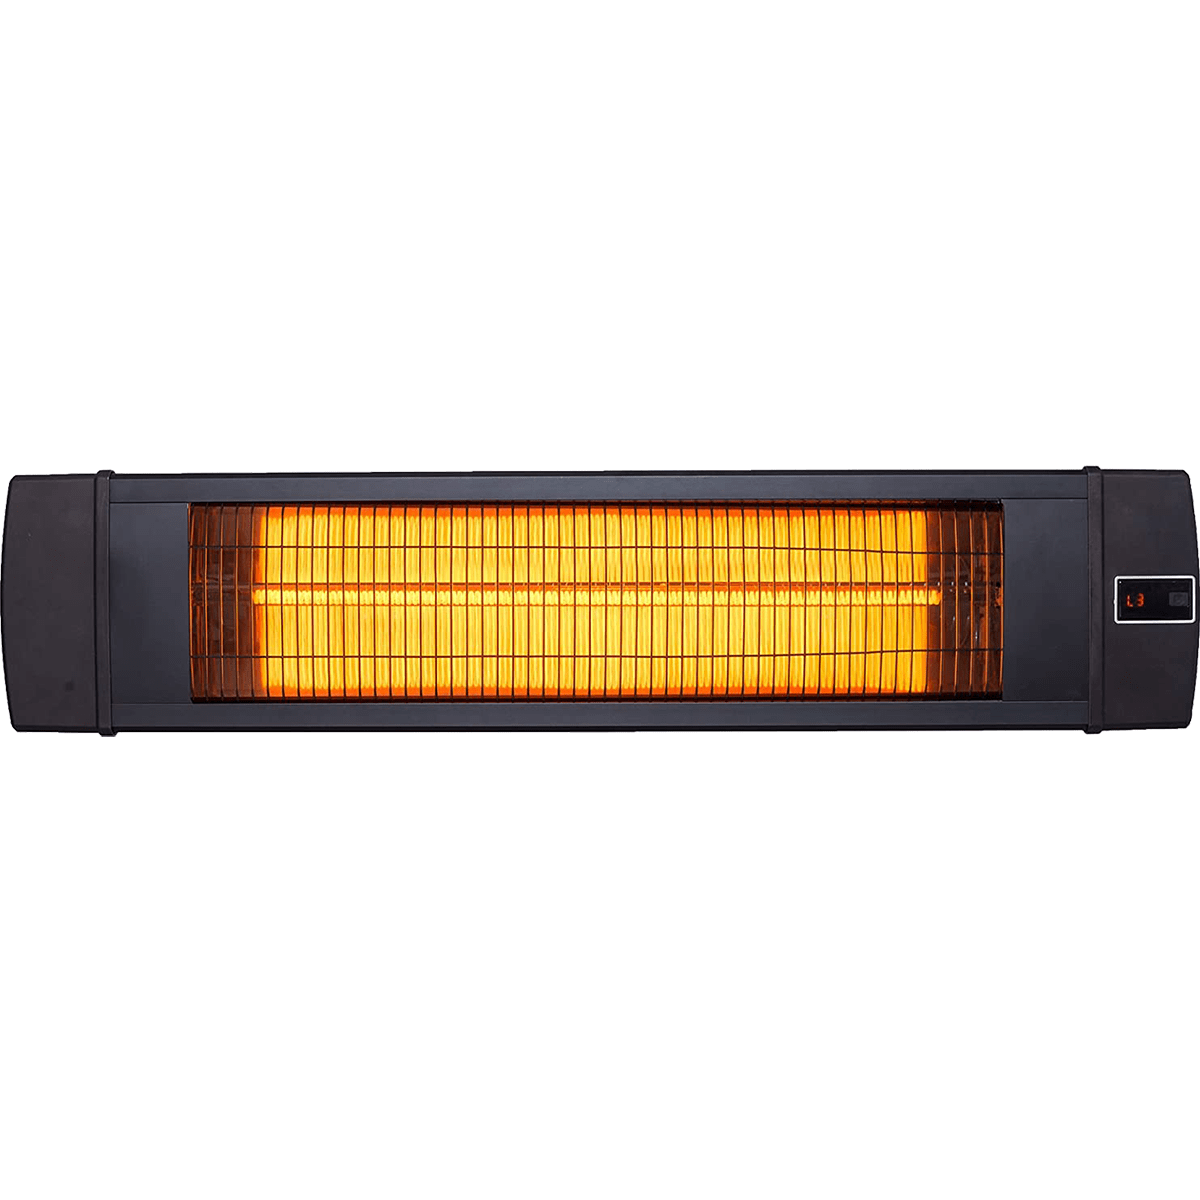 Dr. Infrared Heater 1500 Watt Wall Or Ceiling Mounted Outdoor Patio Heater